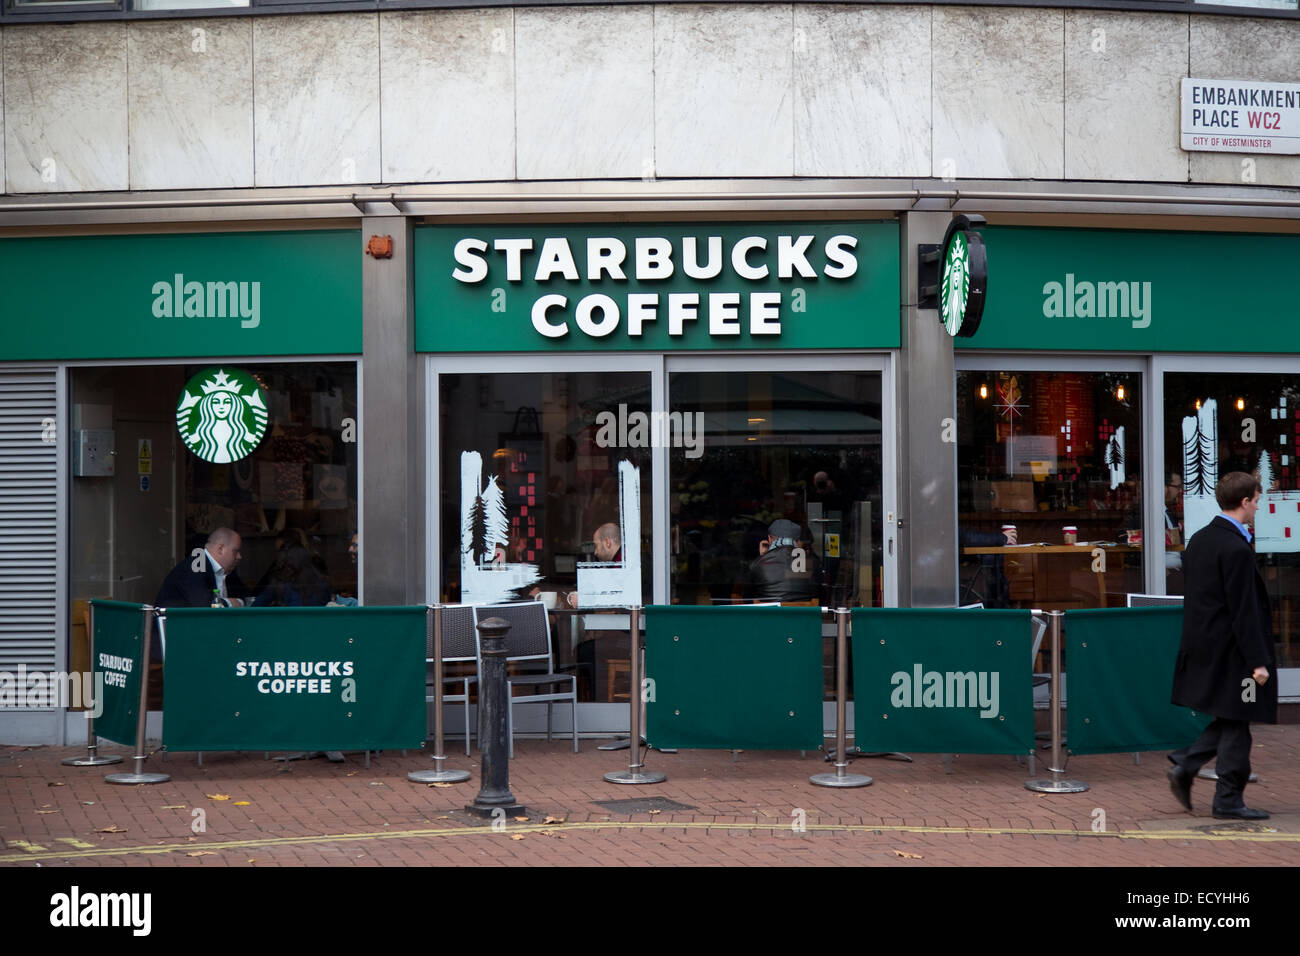 LONDON - DECEMBER 11TH: The exterior of a starbucks coffee shop on December the 11th, 2014, in London, England, UK. Starbucks ha Stock Photo